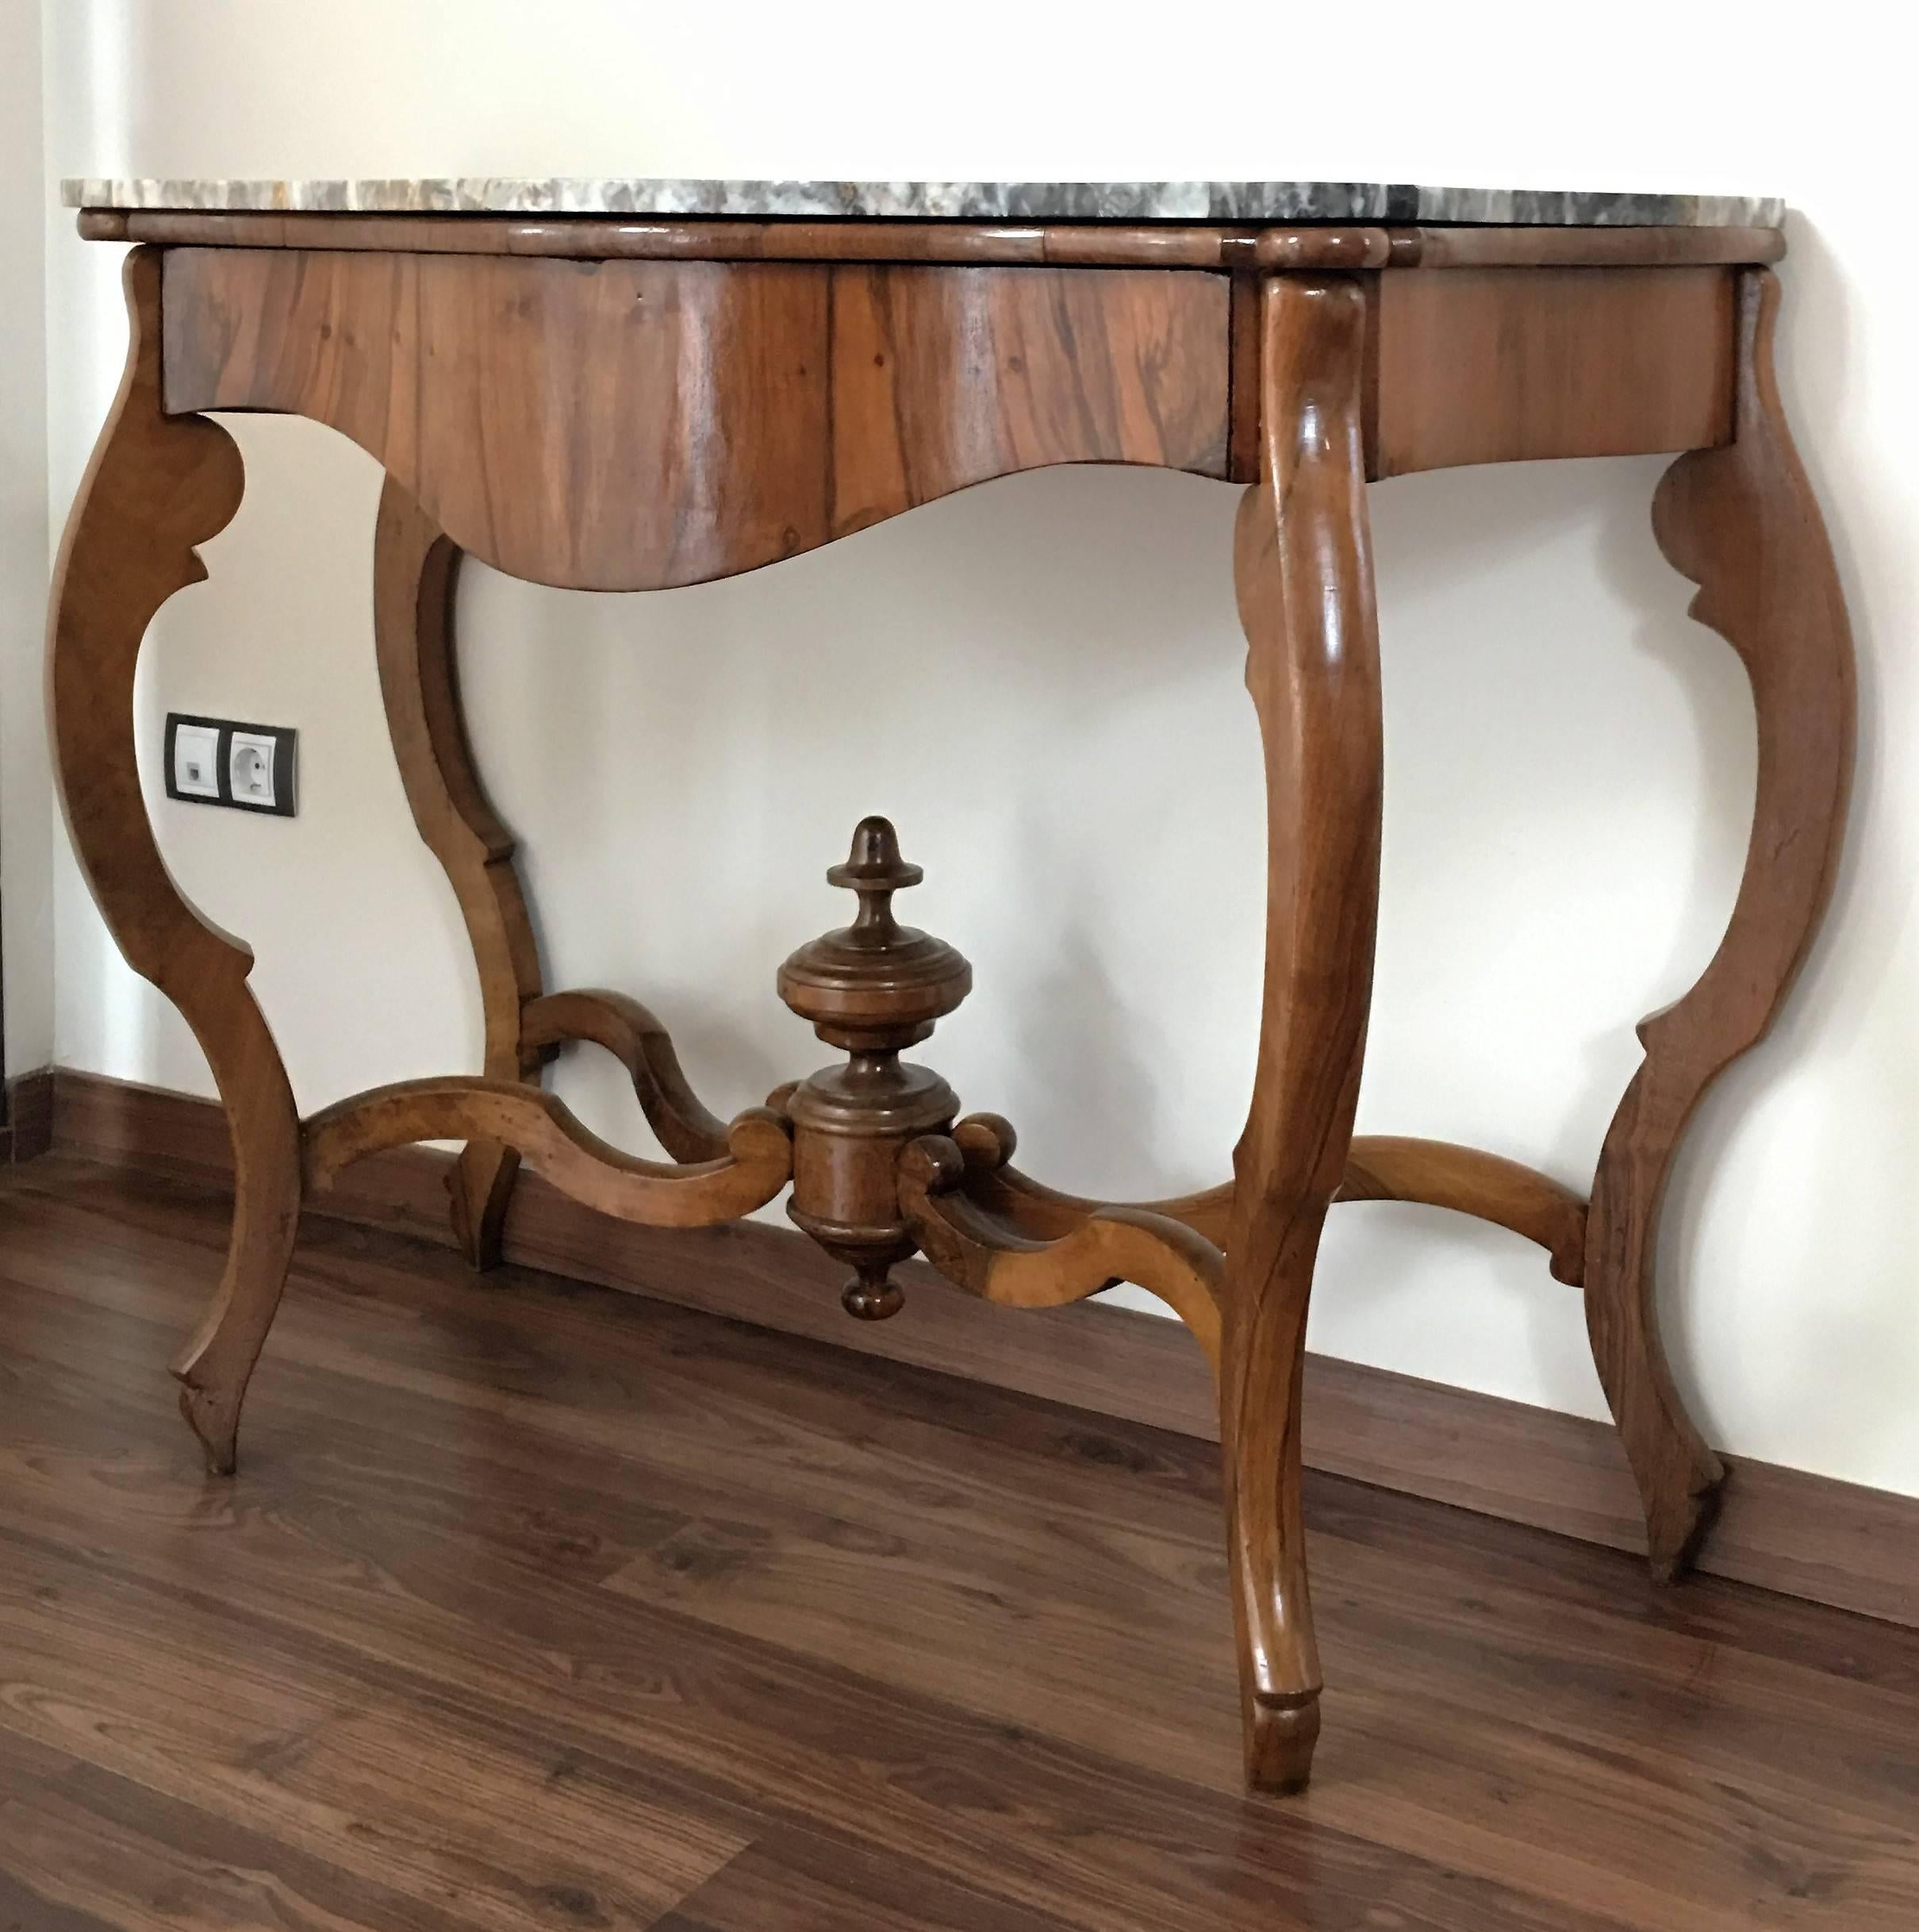 Walnut console table with four curved legs united by an urn stretcher beneath a marble top.